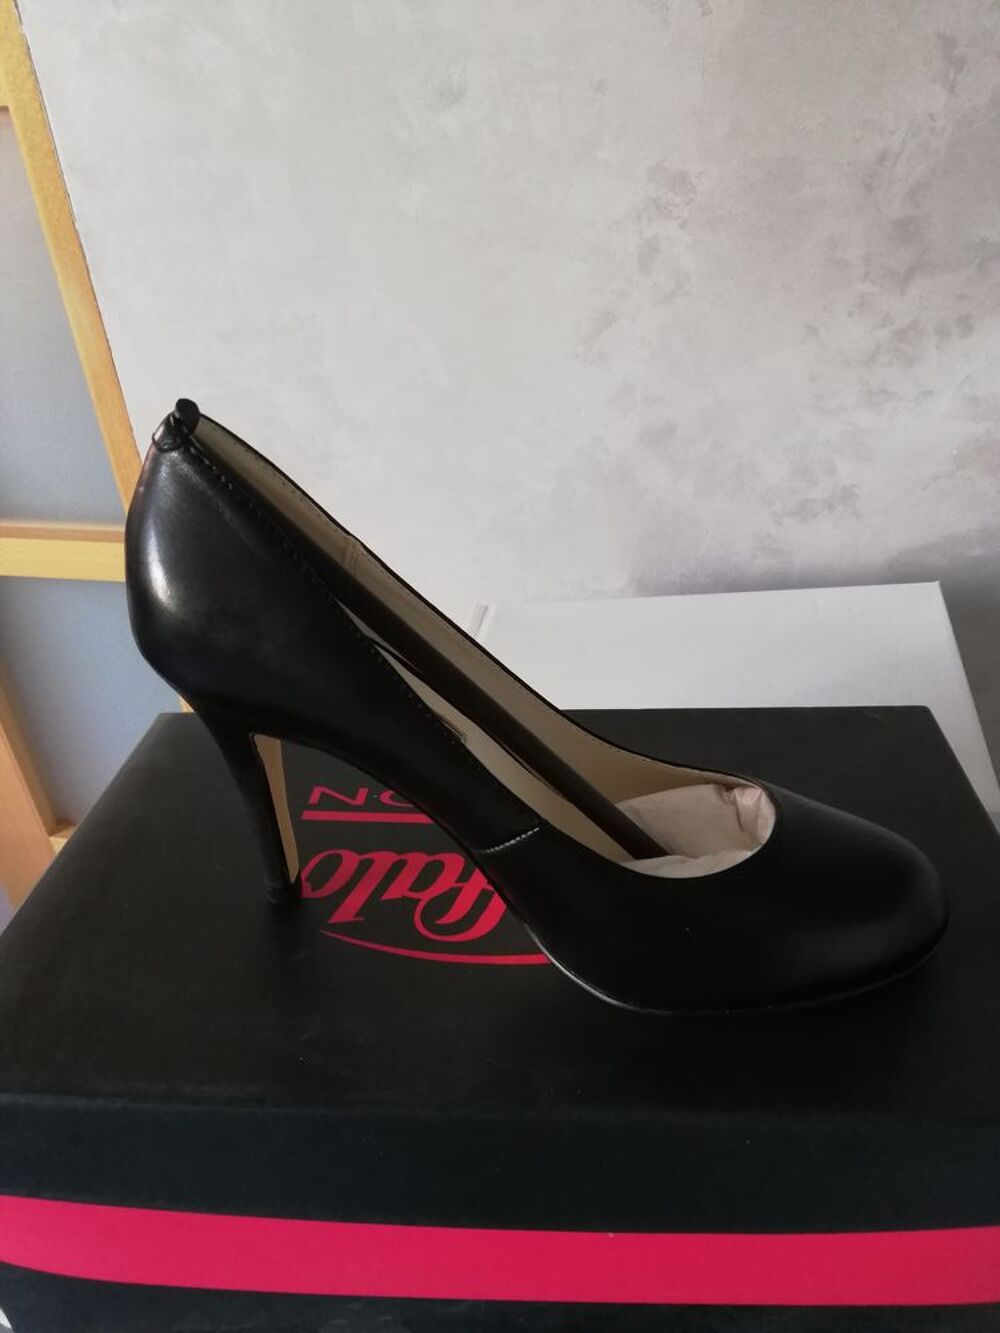 Important stock Chaussures neuves femme point. 37 Chaussures